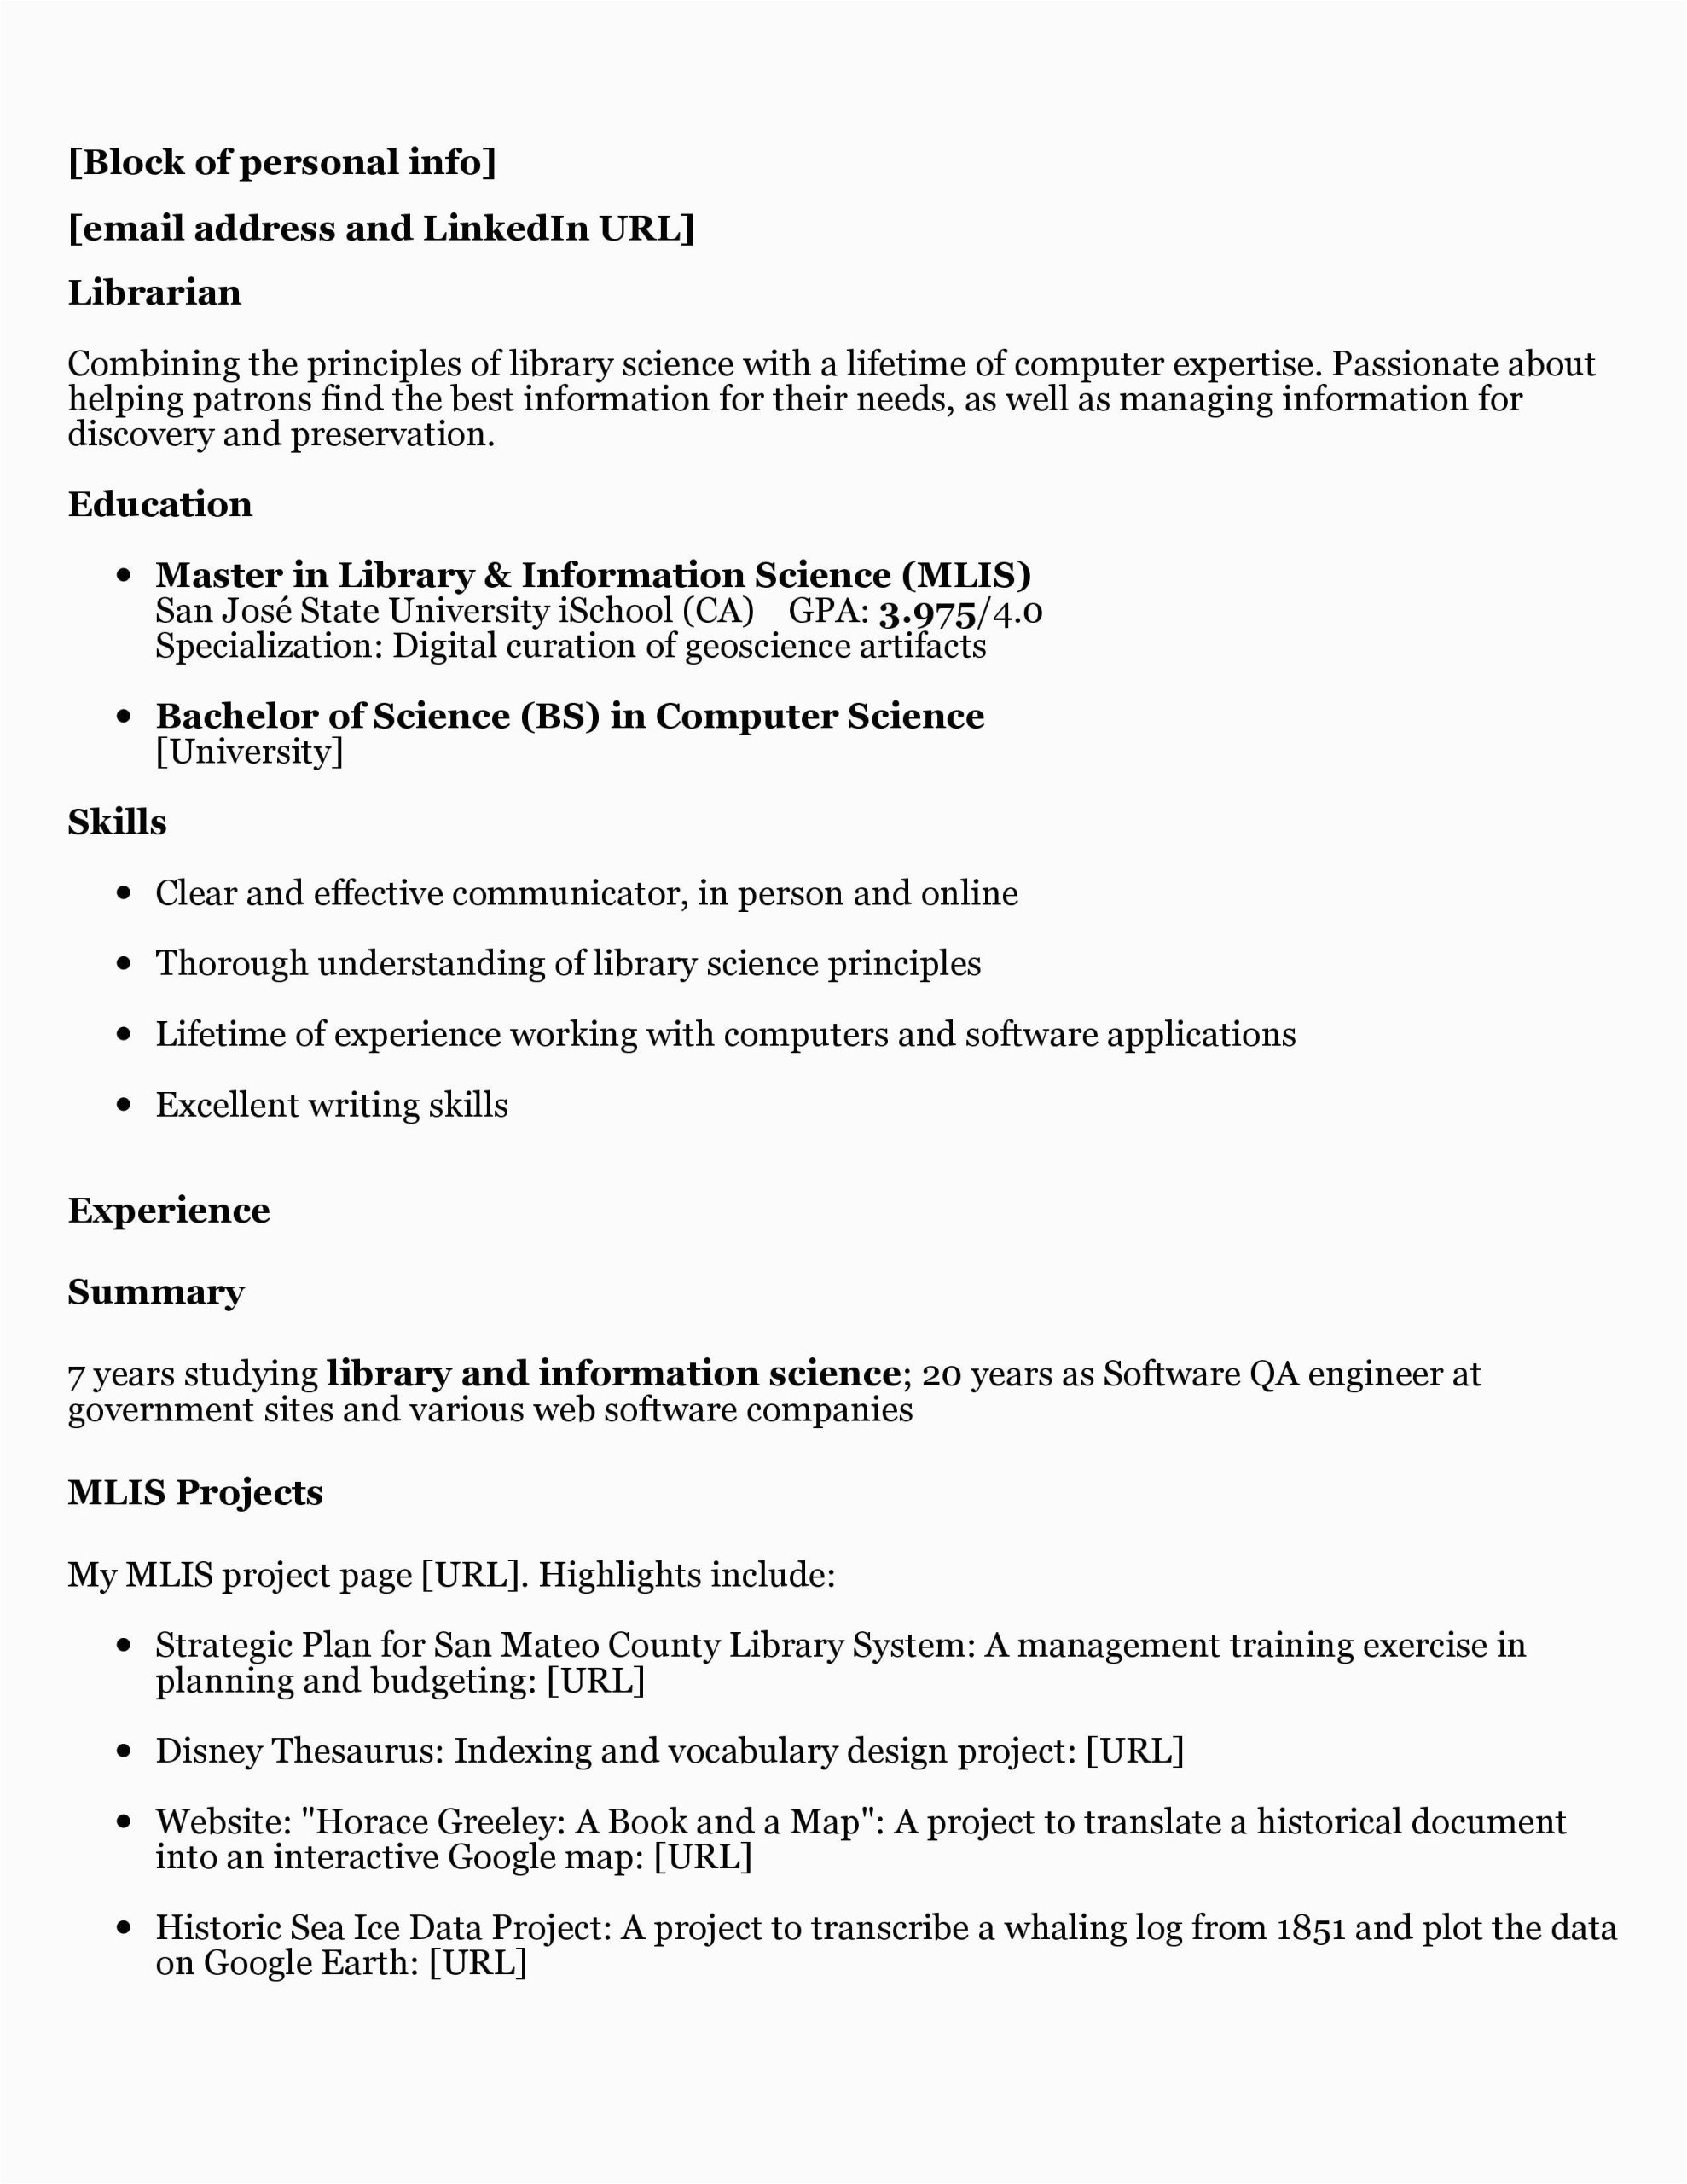 Sample Professional Profiles for Public Librarian Resume for Public Review Unnamed Job Hunter 20